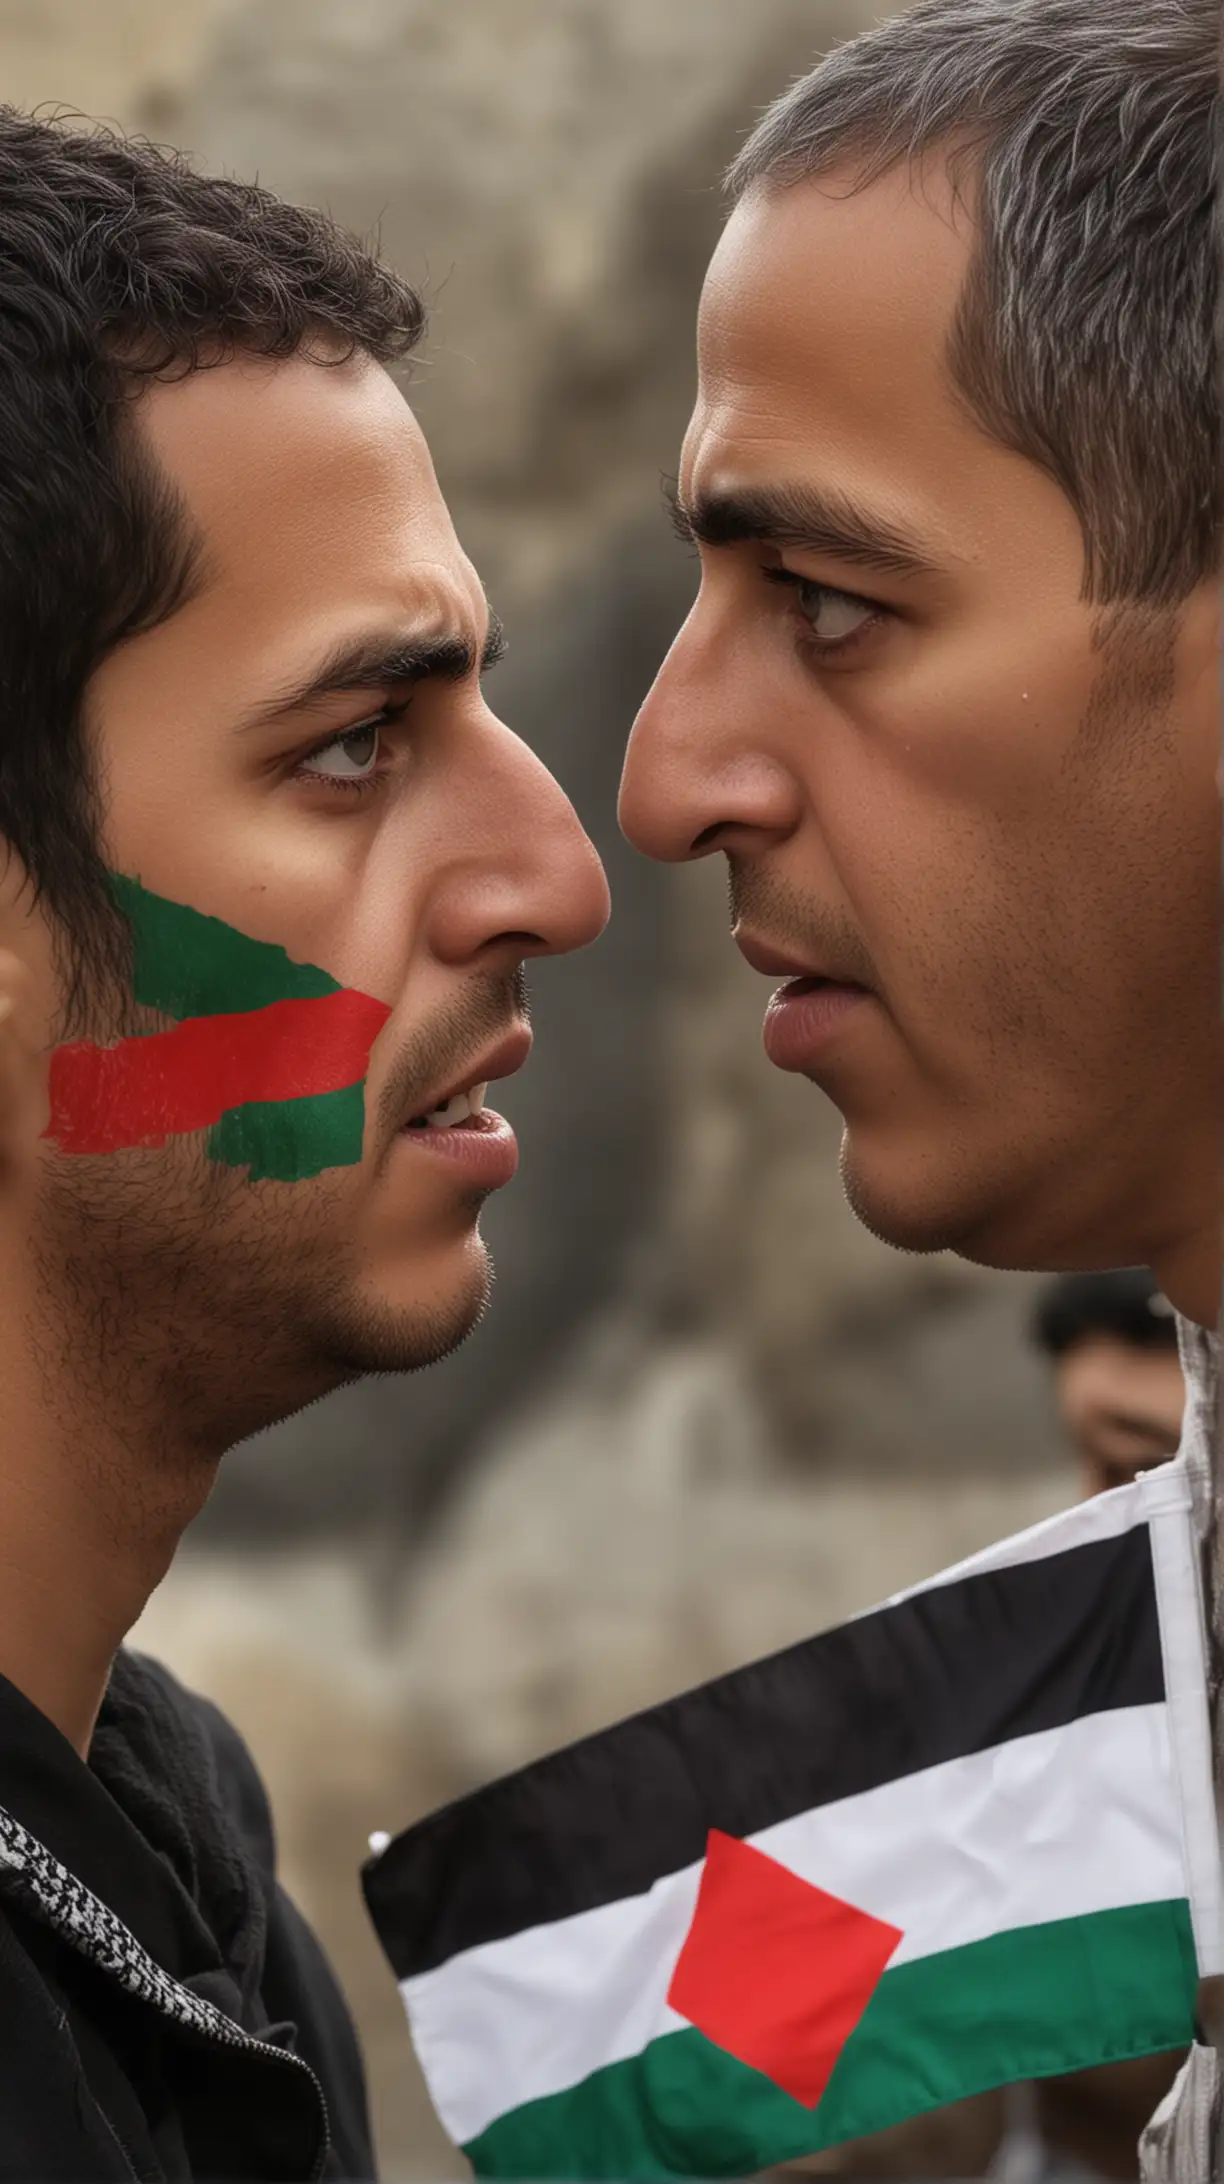 Palestinian and Israeli looking at each other with anger in camera only heads one keeping Palestinian  flag other keep Israeli flag